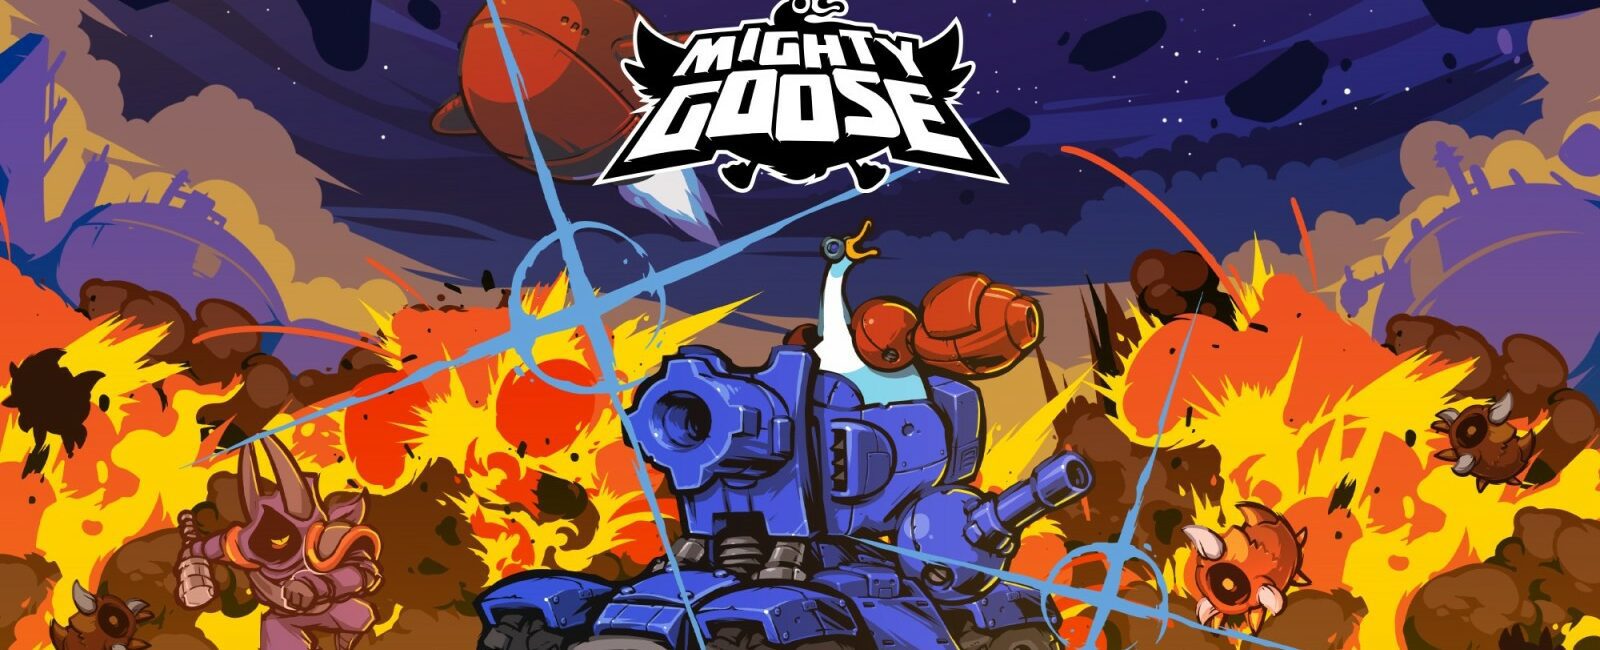 th mighty goose